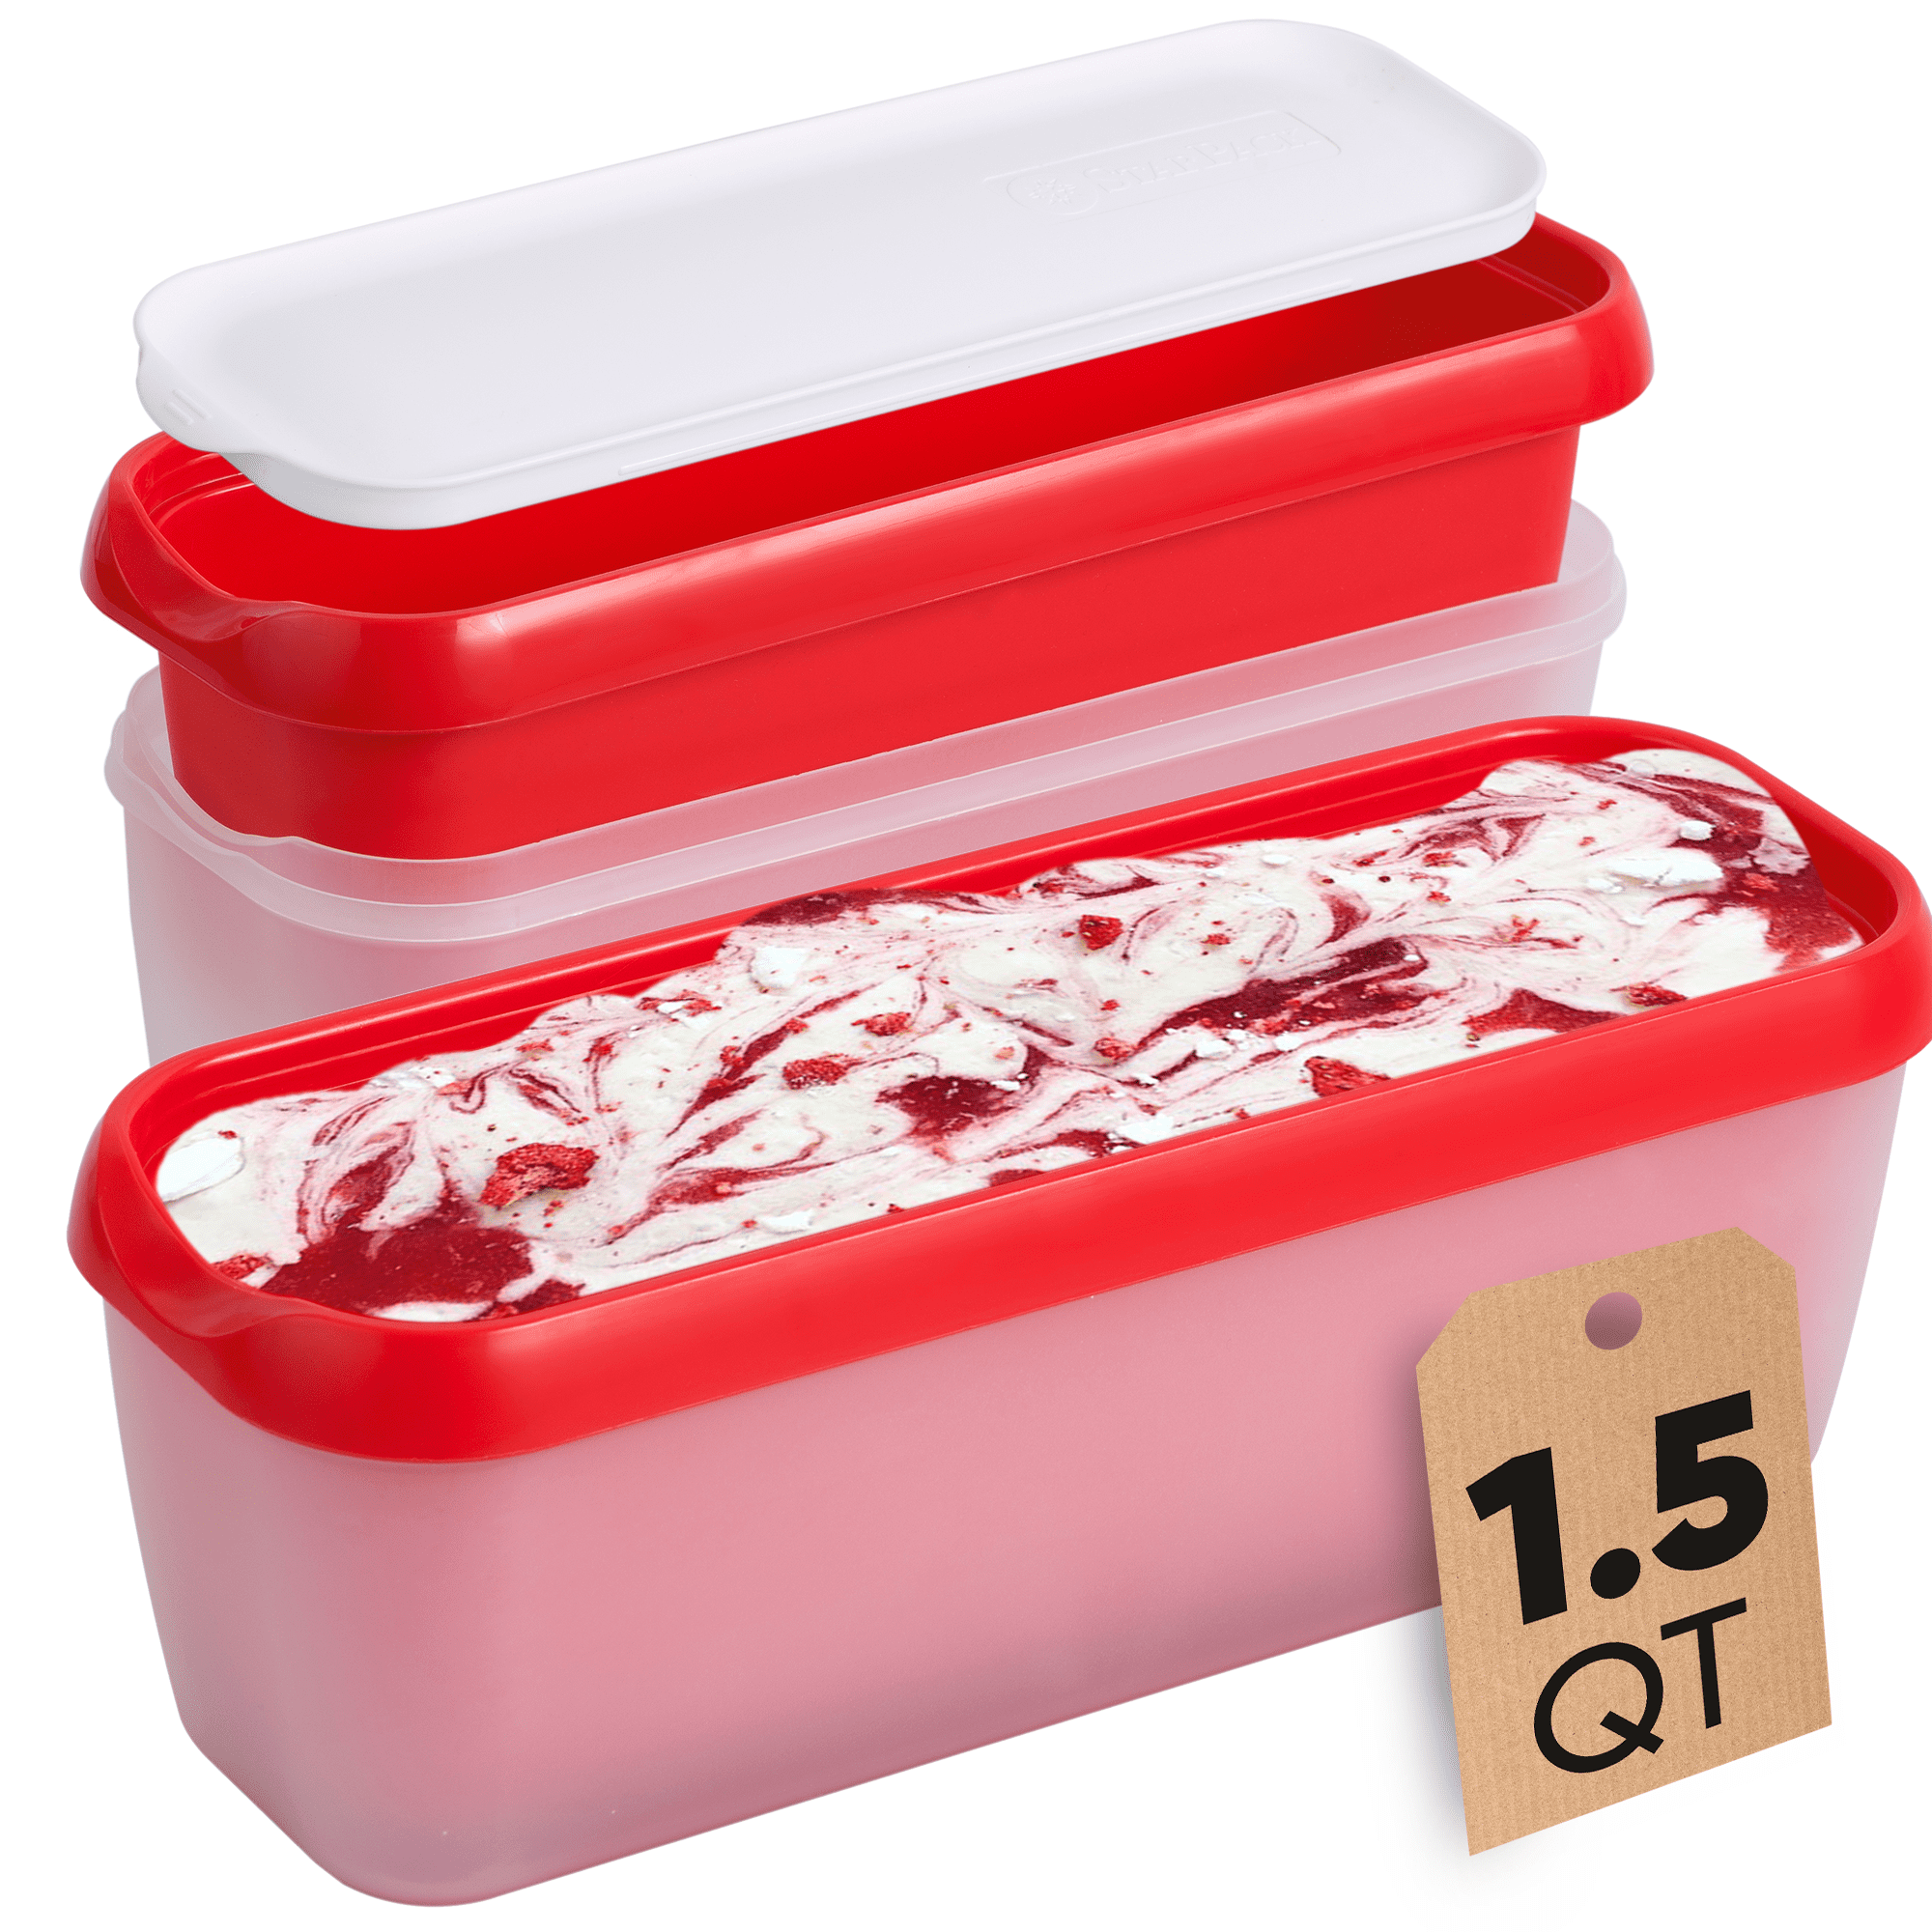 Ice Cream containers for homemade ice cream, Reusable Storage Freezer ice  cream Container With Lids, BPA FREE, Dishwasher Safe Tub. Double Insulated